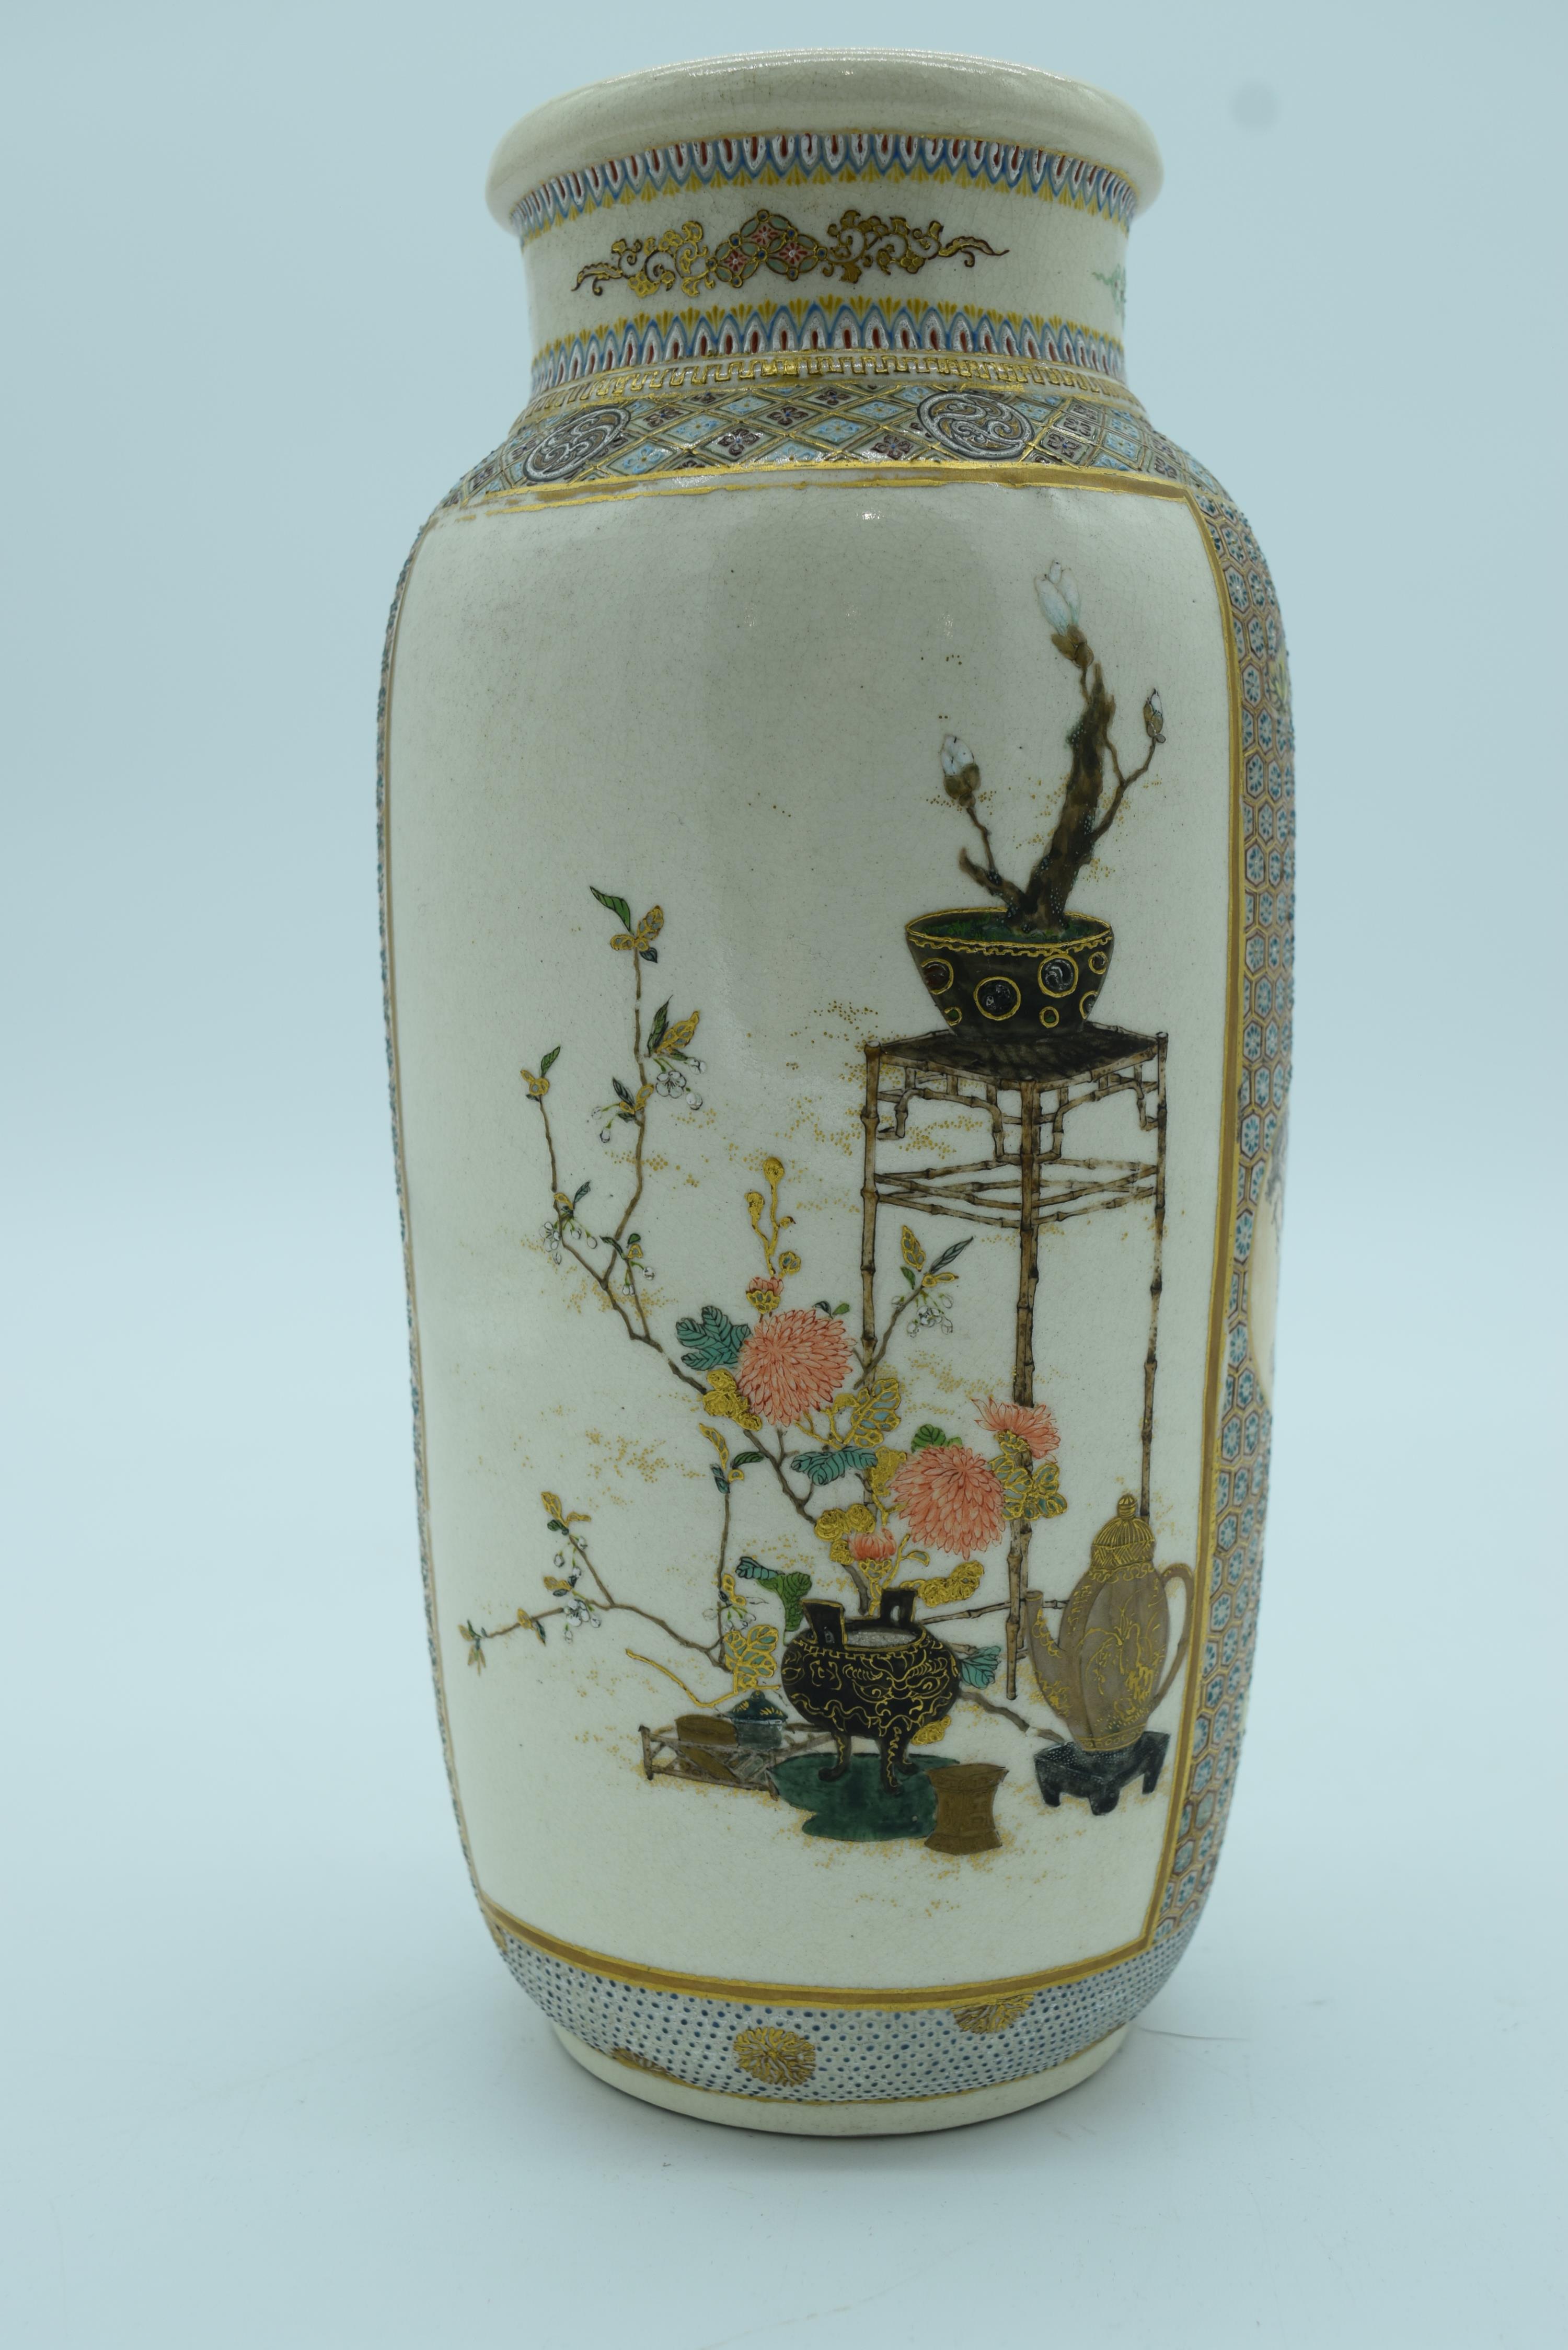 A PAIR OF 19TH CENTURY JAPANESE MEIJI PERIOD SATSUMA VASES painted with bonzai trees and high tables - Image 10 of 19